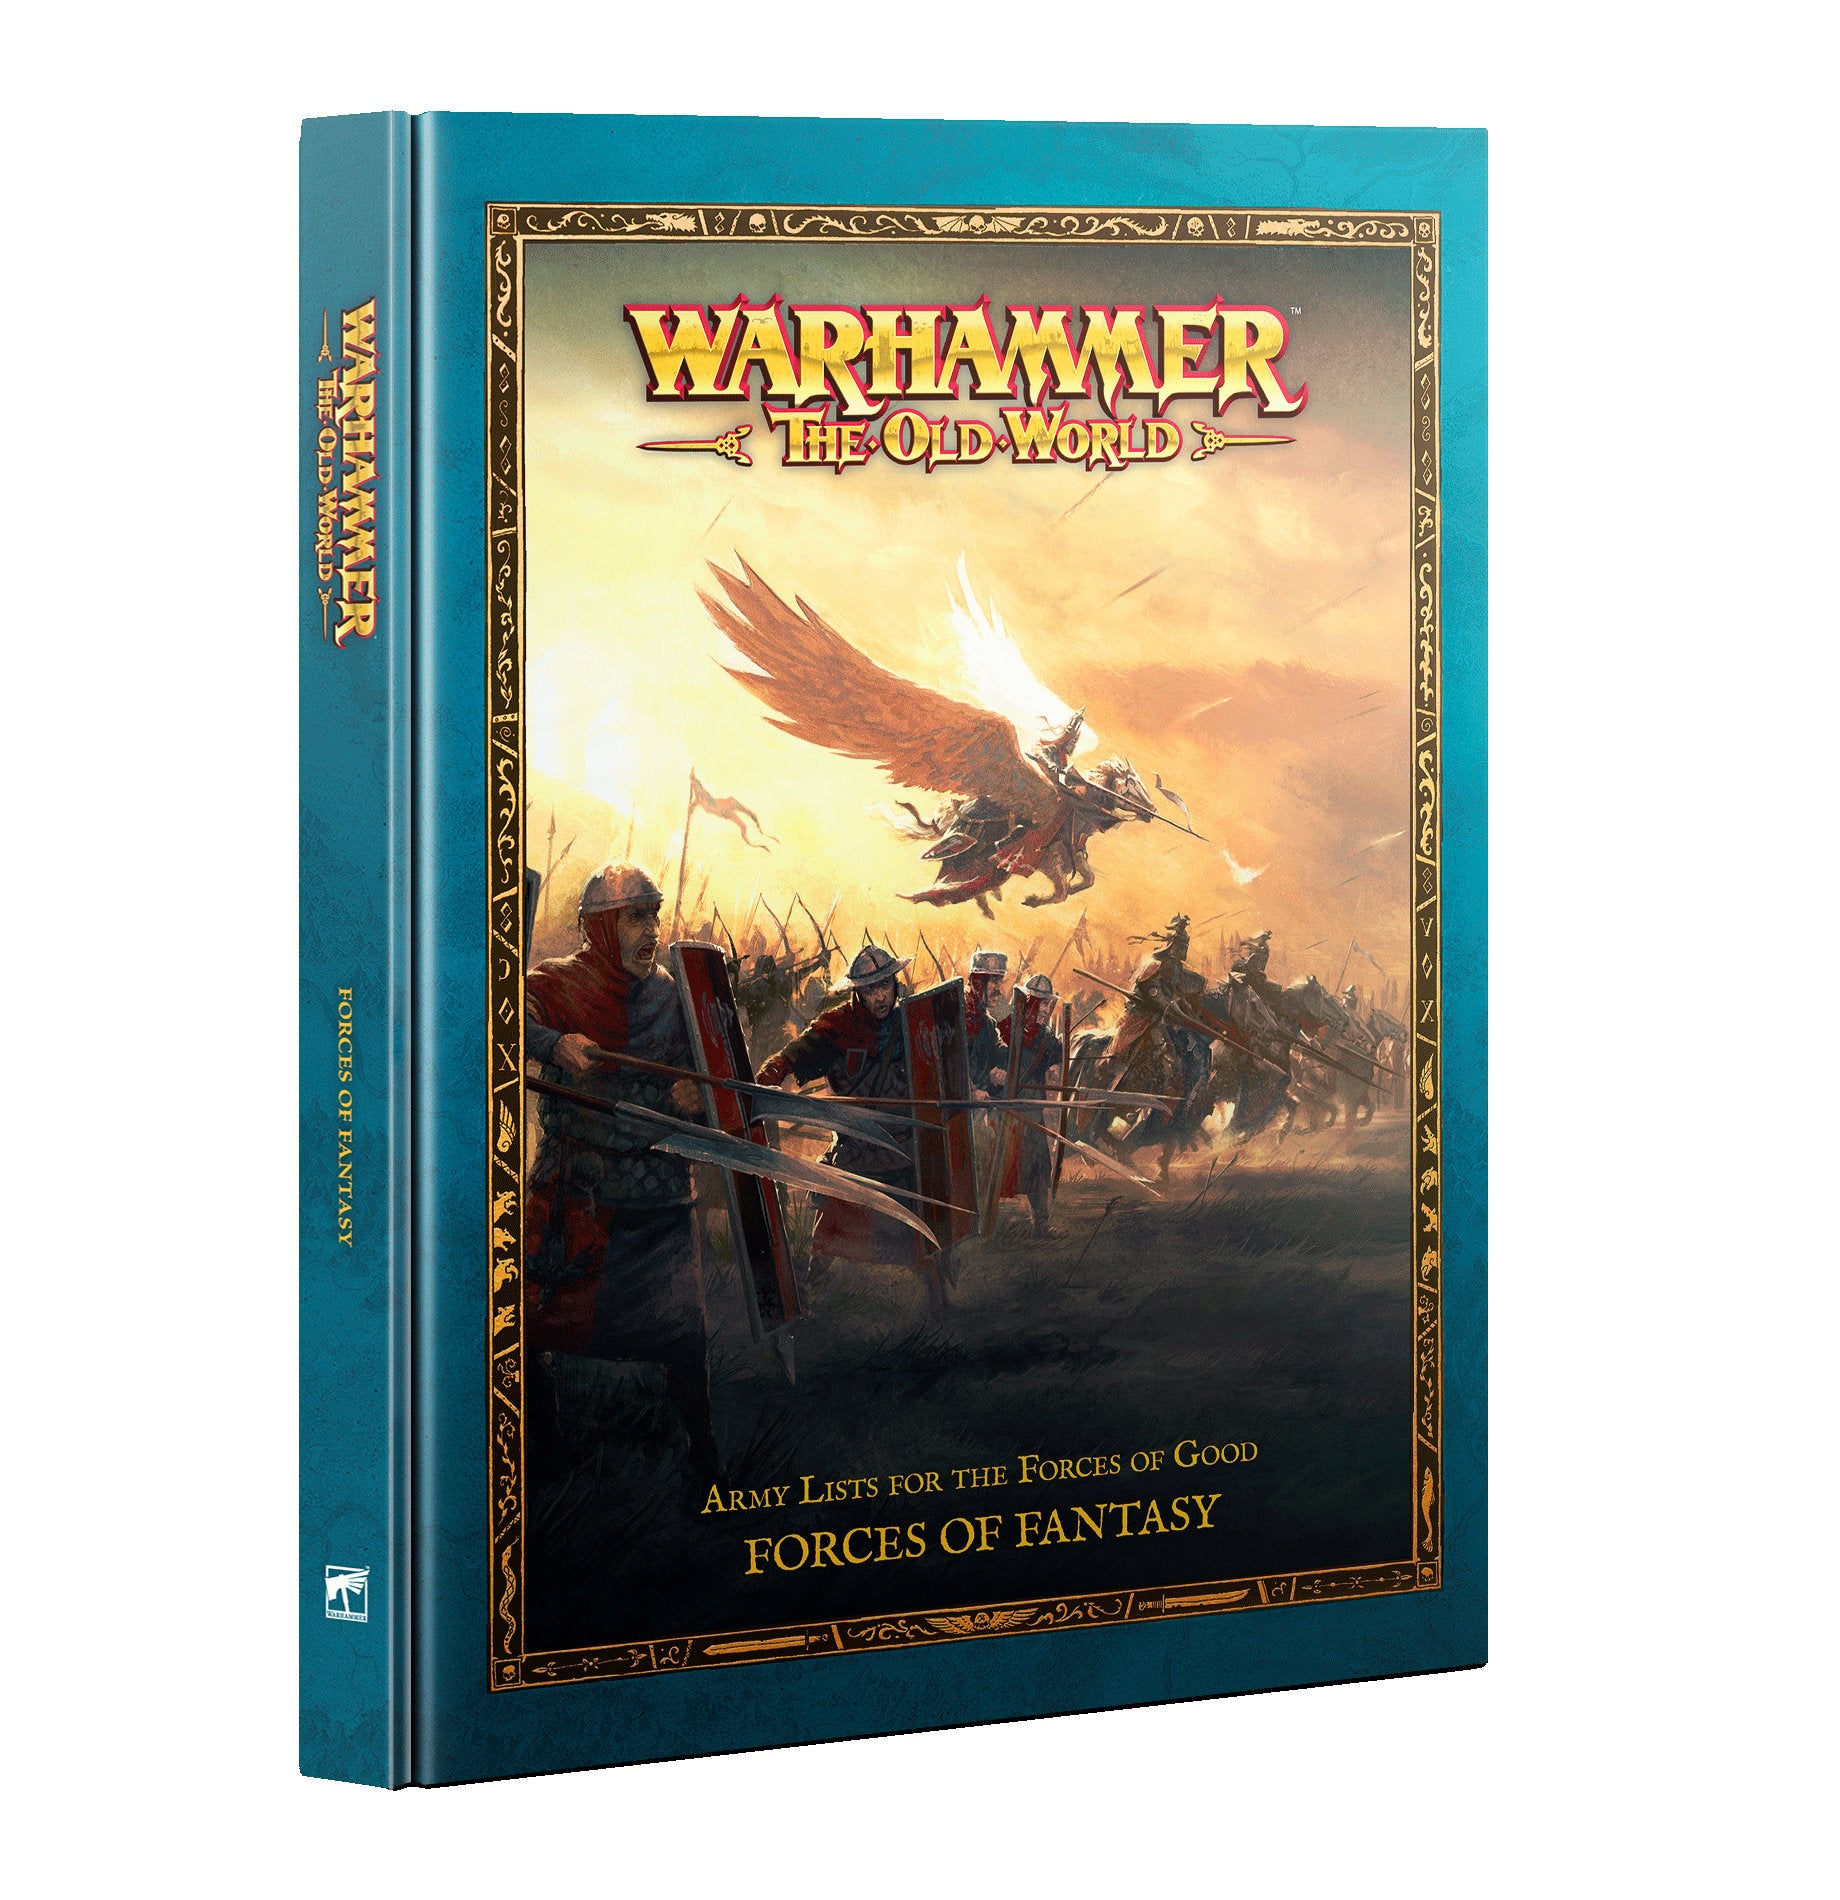 Warhammer The Old World: Army Lists for the Forces of Good - Forces of Fantasy